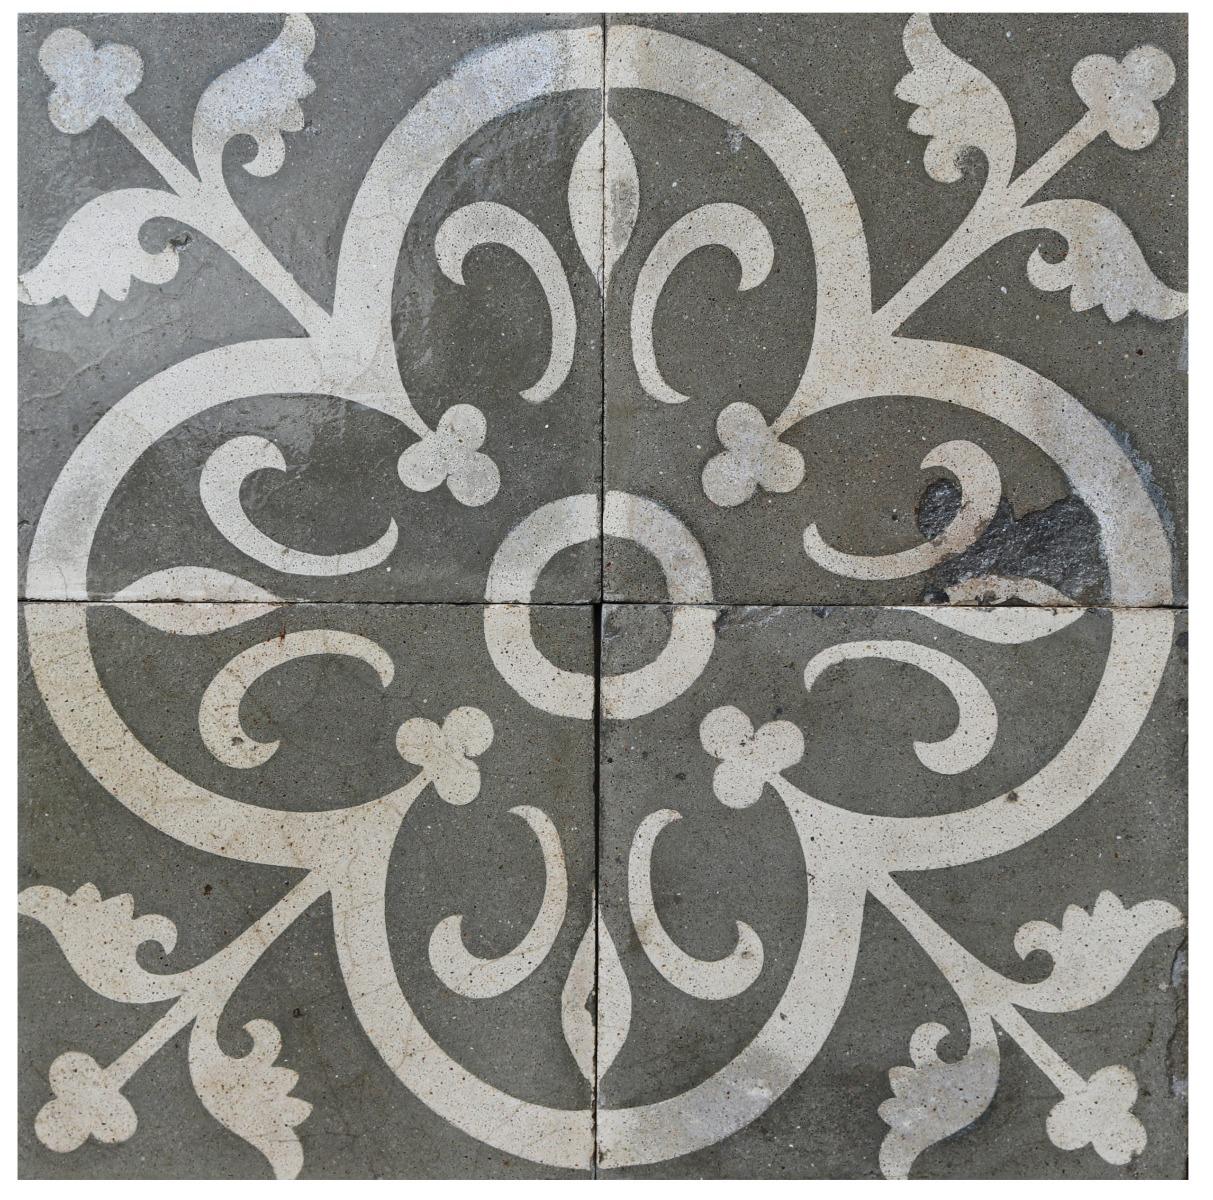 A set of 141 reclaimed encaustic cement tiles. These tiles will cover 5.64 m2 (60 sq ft).